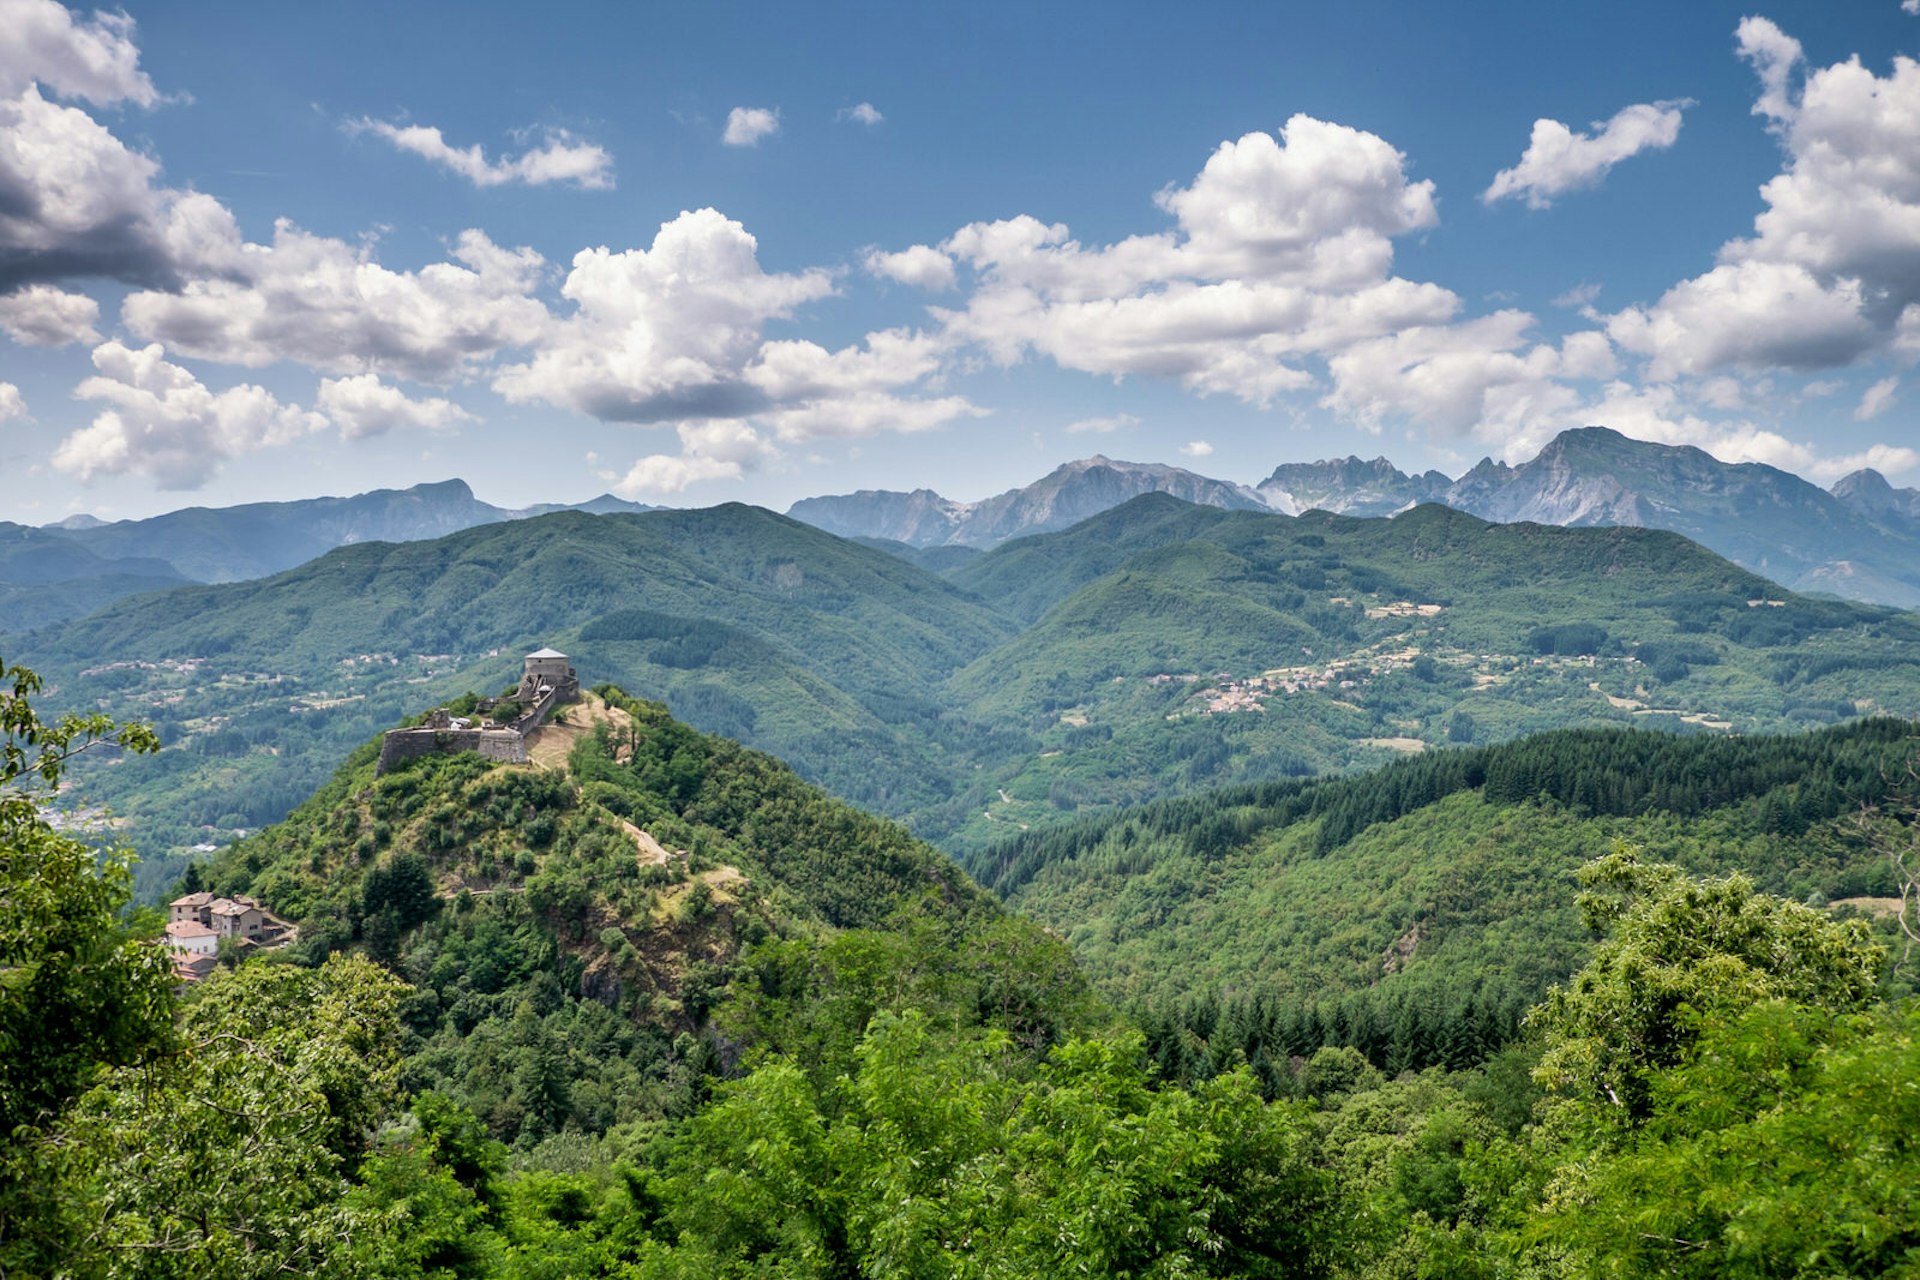 The rugged, forested hills of the Garfagnana, with mountains in the background © Getty Images